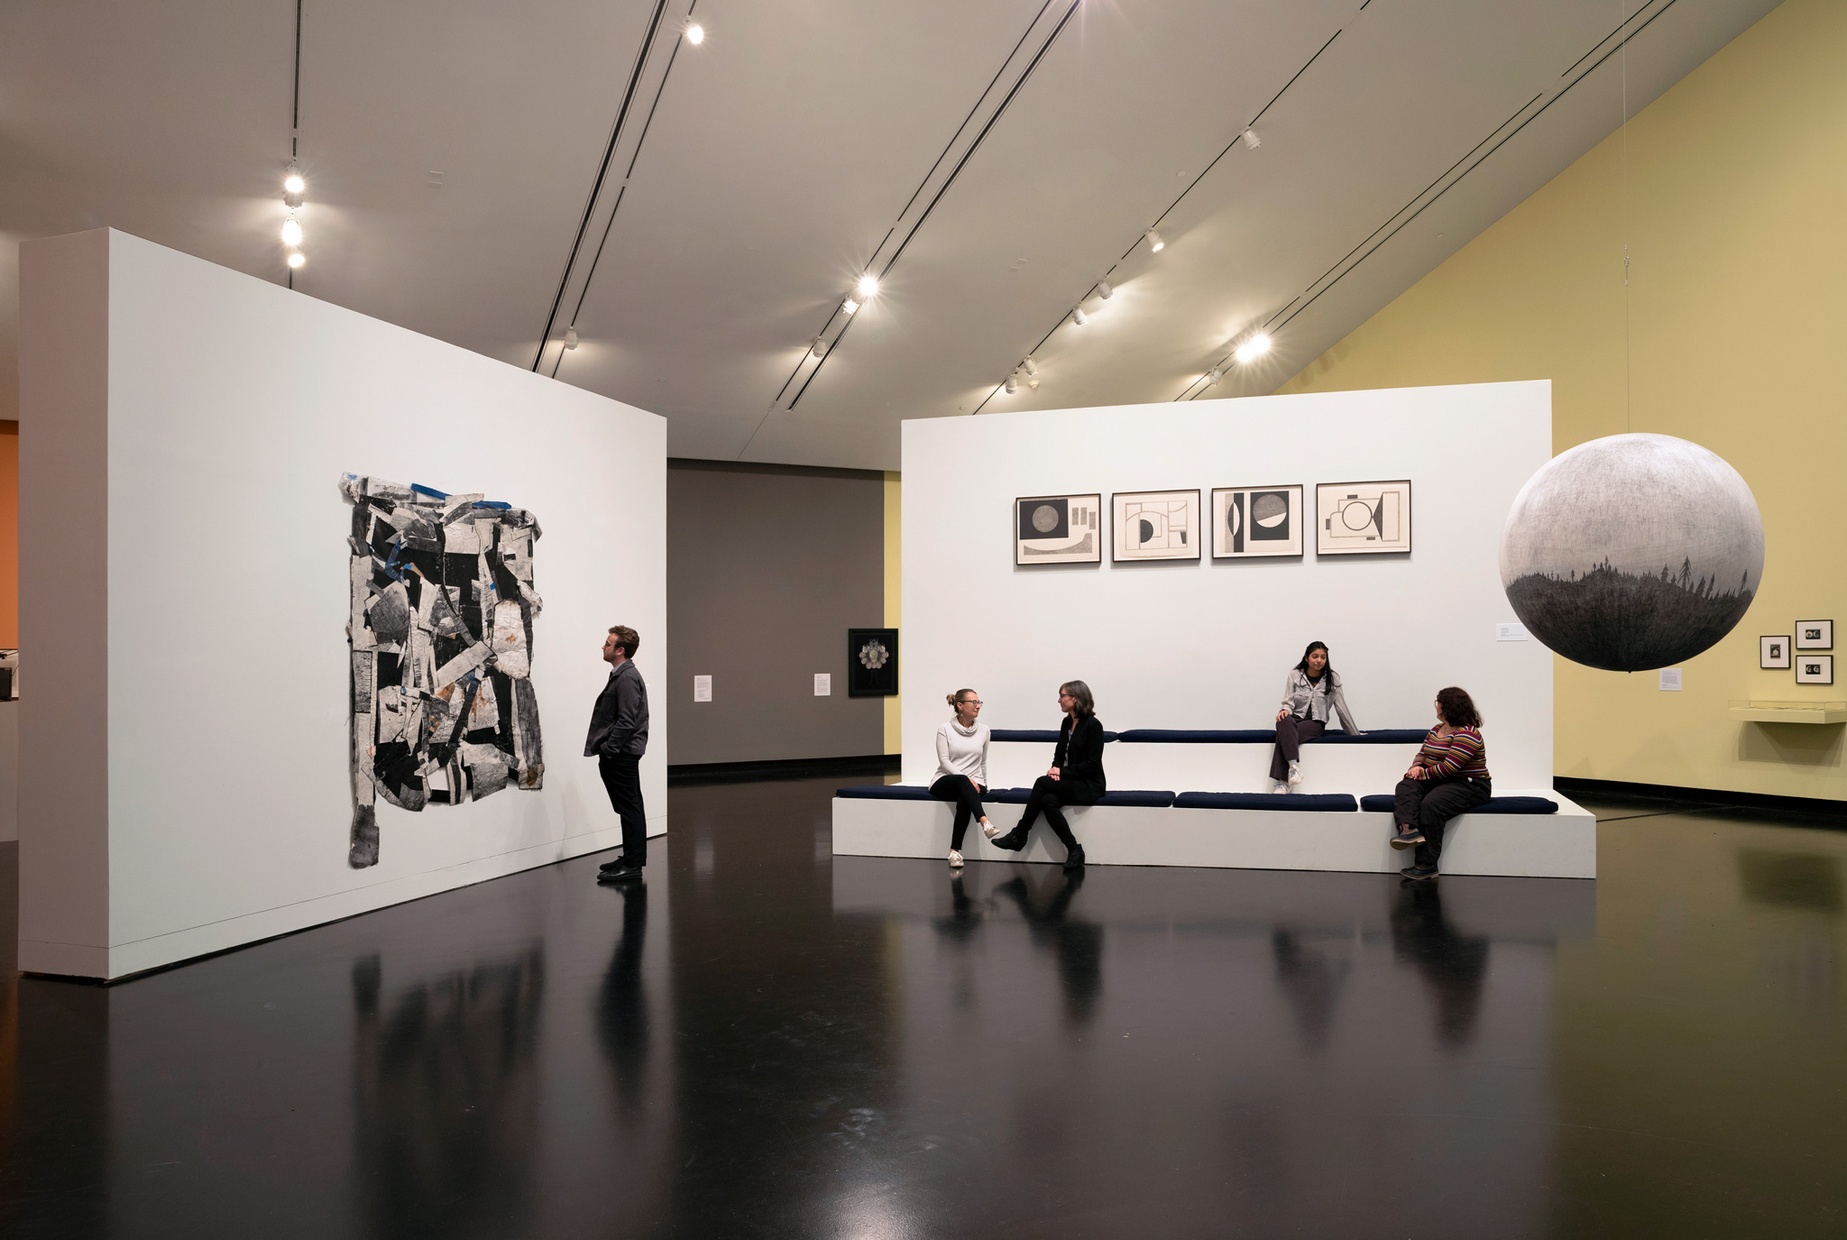 In a gallery, a man stands to our left observing an artwork on a freestanding wall, while four people to our right sit on benches in front of a freestanding wall.